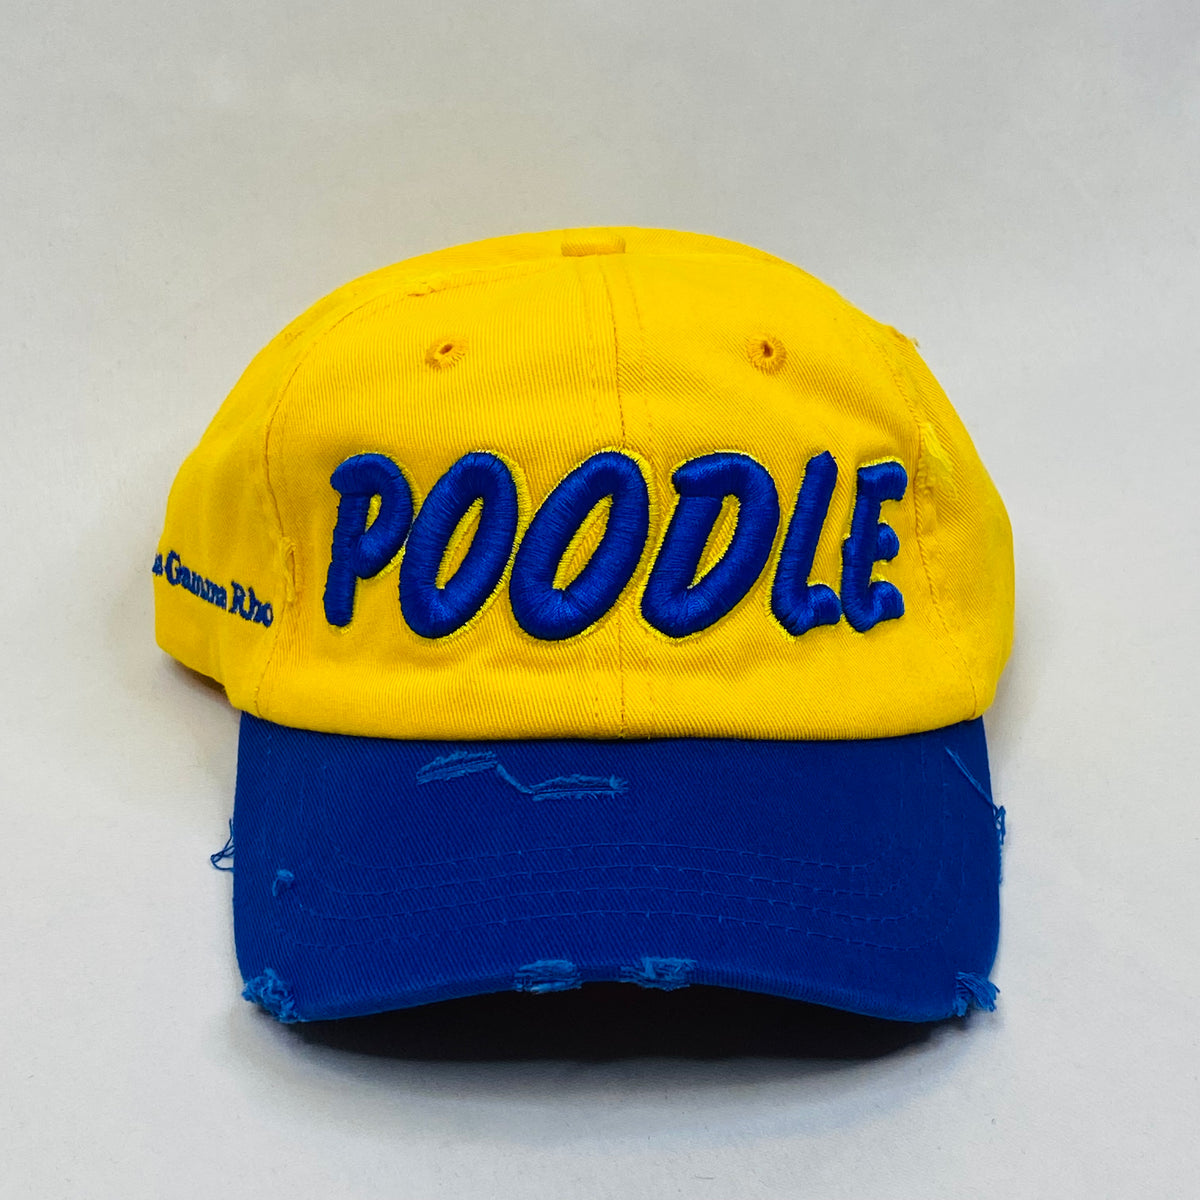 “POODLE” SGRho Yellow Gold & Royal Blue Hat